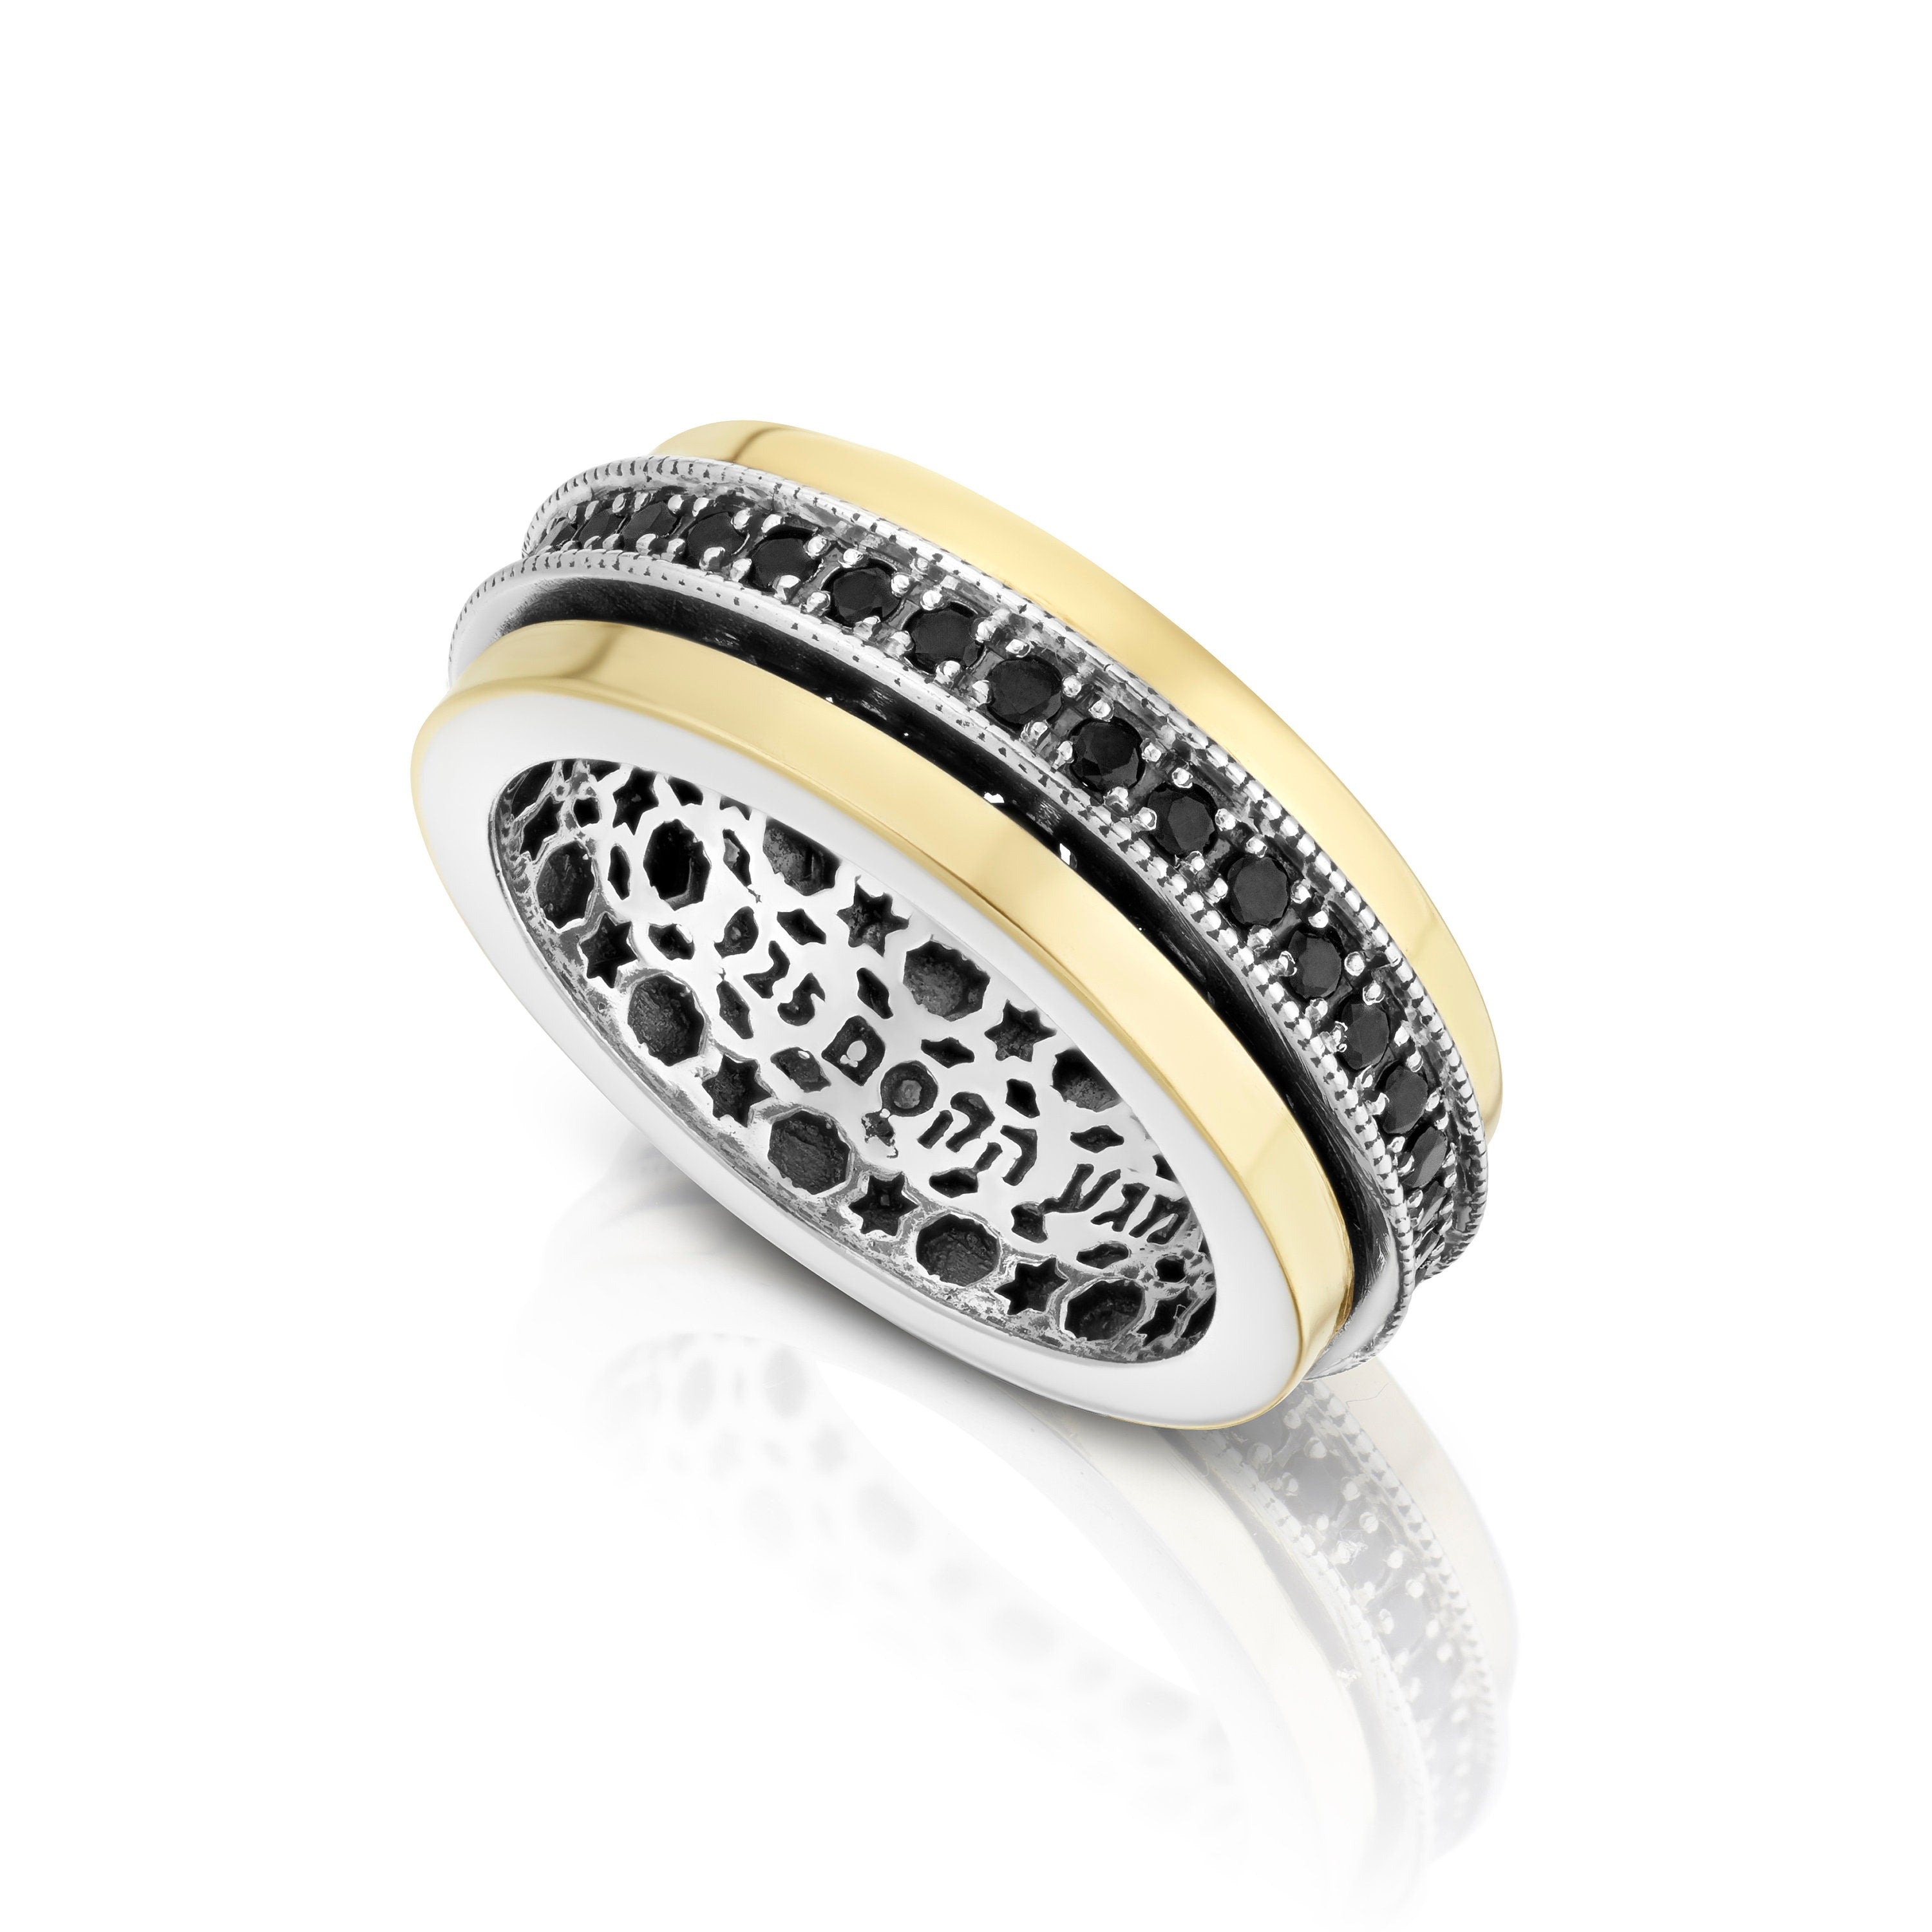 Spinning Ring 925 Sterling Silver with 9K Gold and Black zircon stones- from Israel